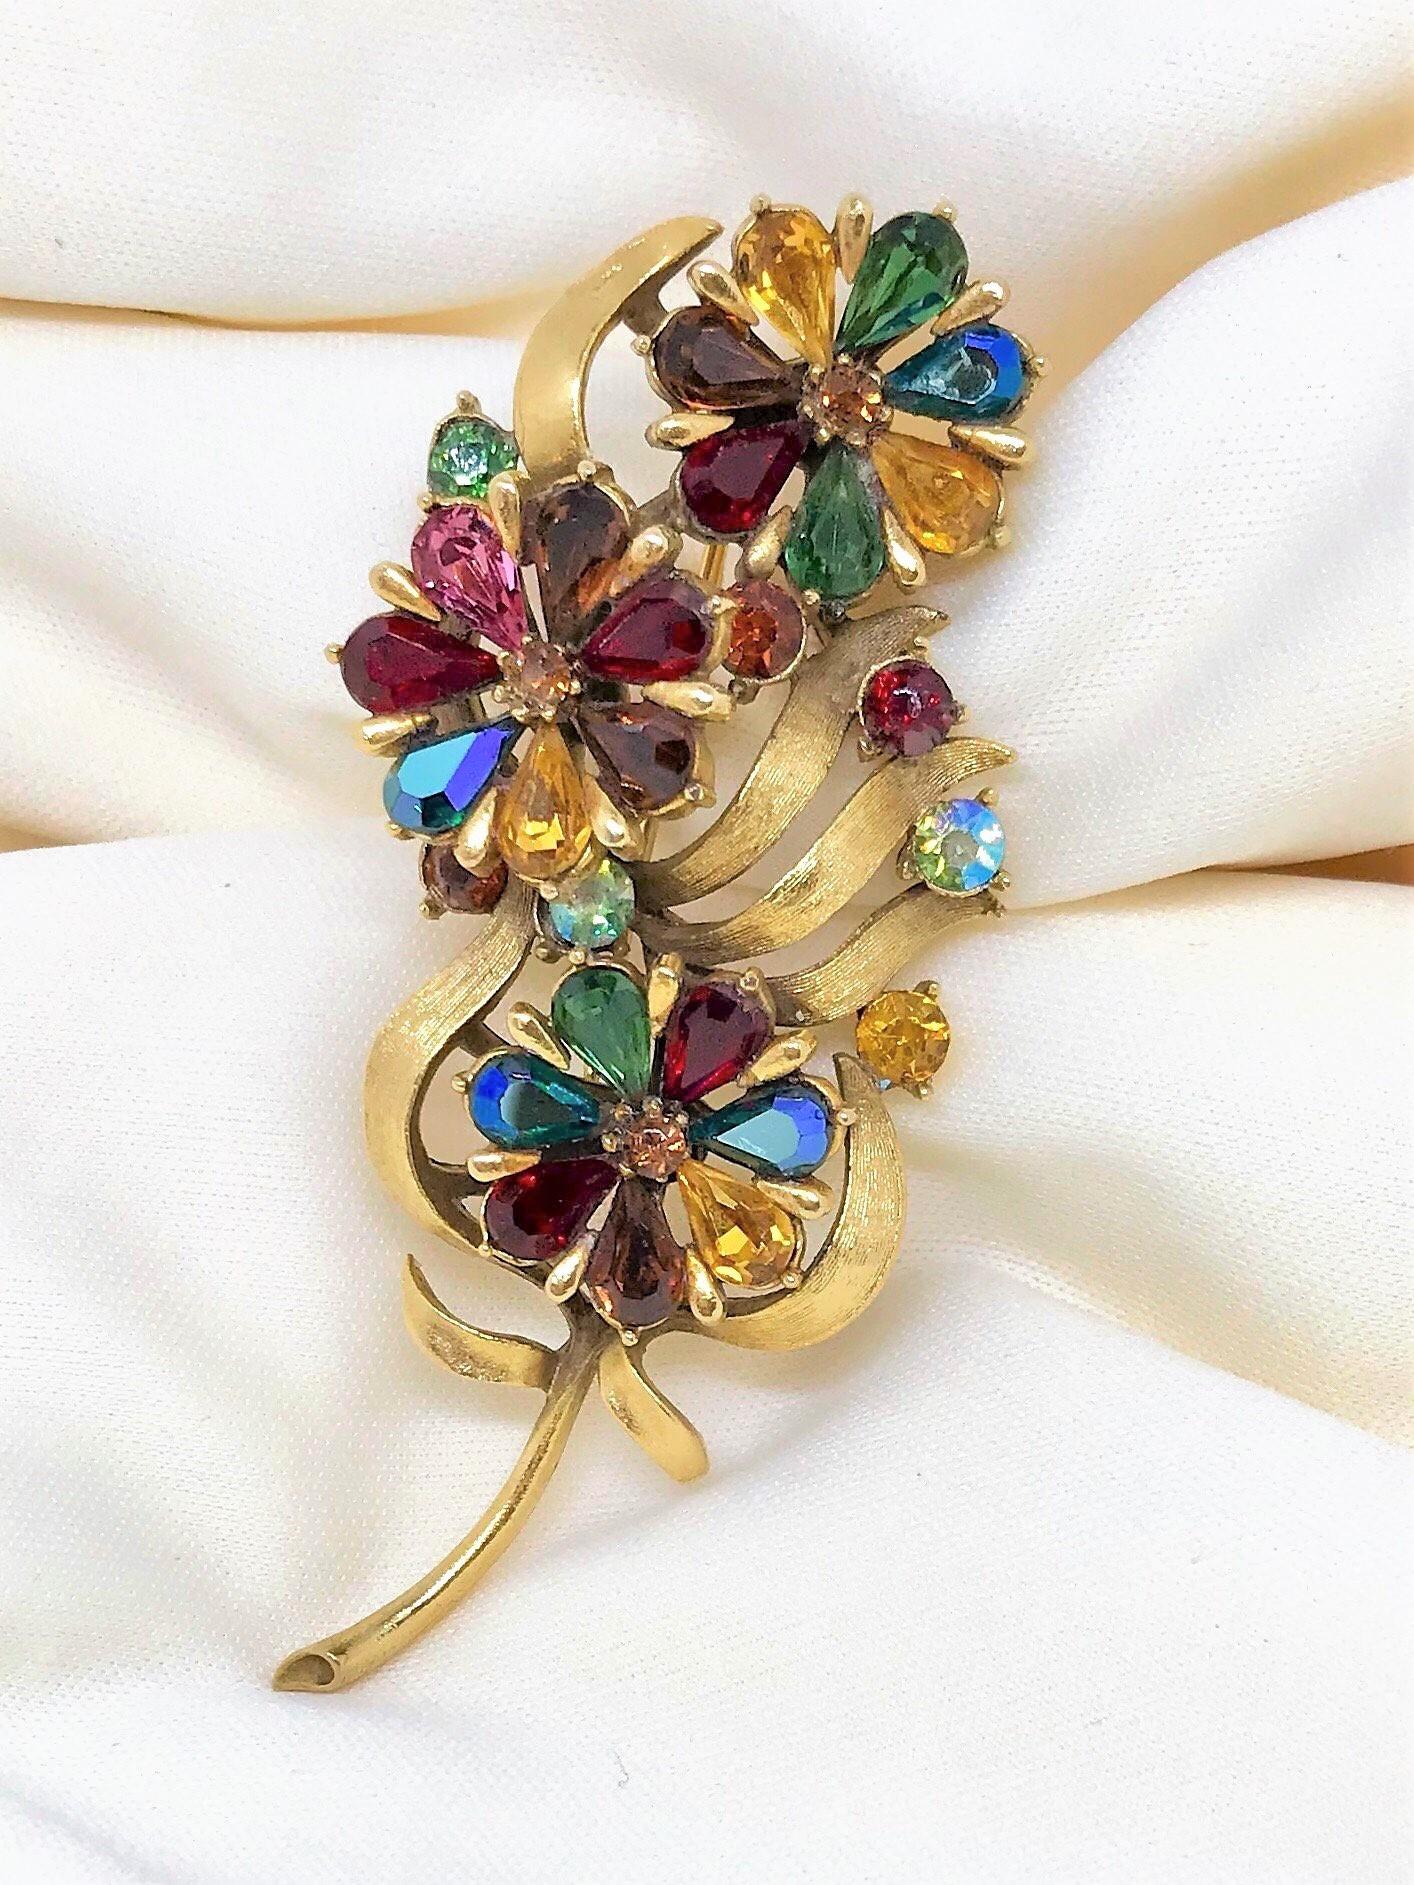 Circa 1960s Coro brooch in a floral and leaf motif done in a rich gold-tone brushed metal.  It is set with faceted glass pear-shape stones in multiple jewel-tone colors.  The brooch measures 3.25